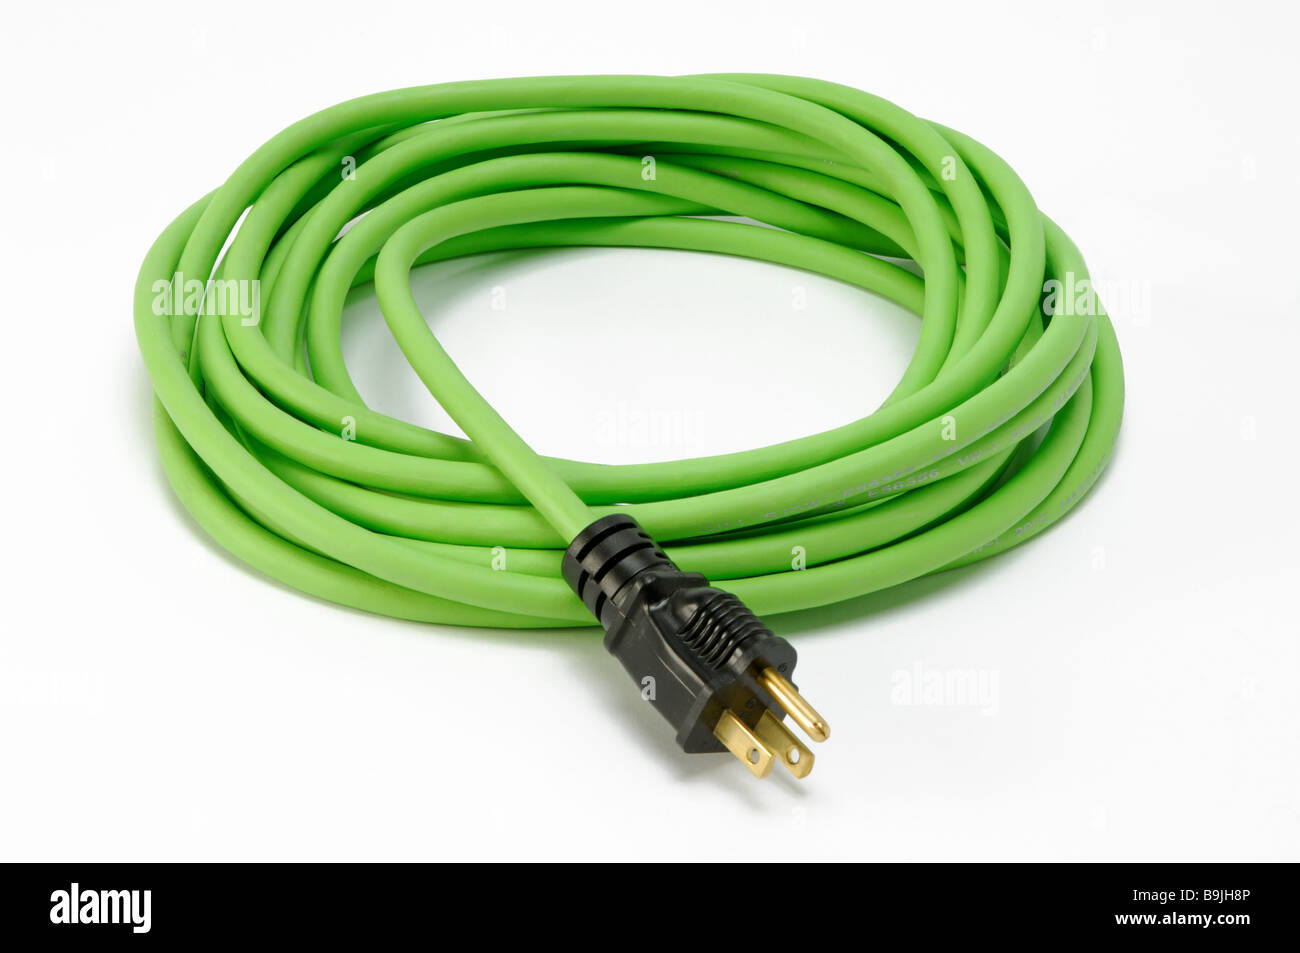 A coiled green electrical extension power cord with one plug Stock Photo